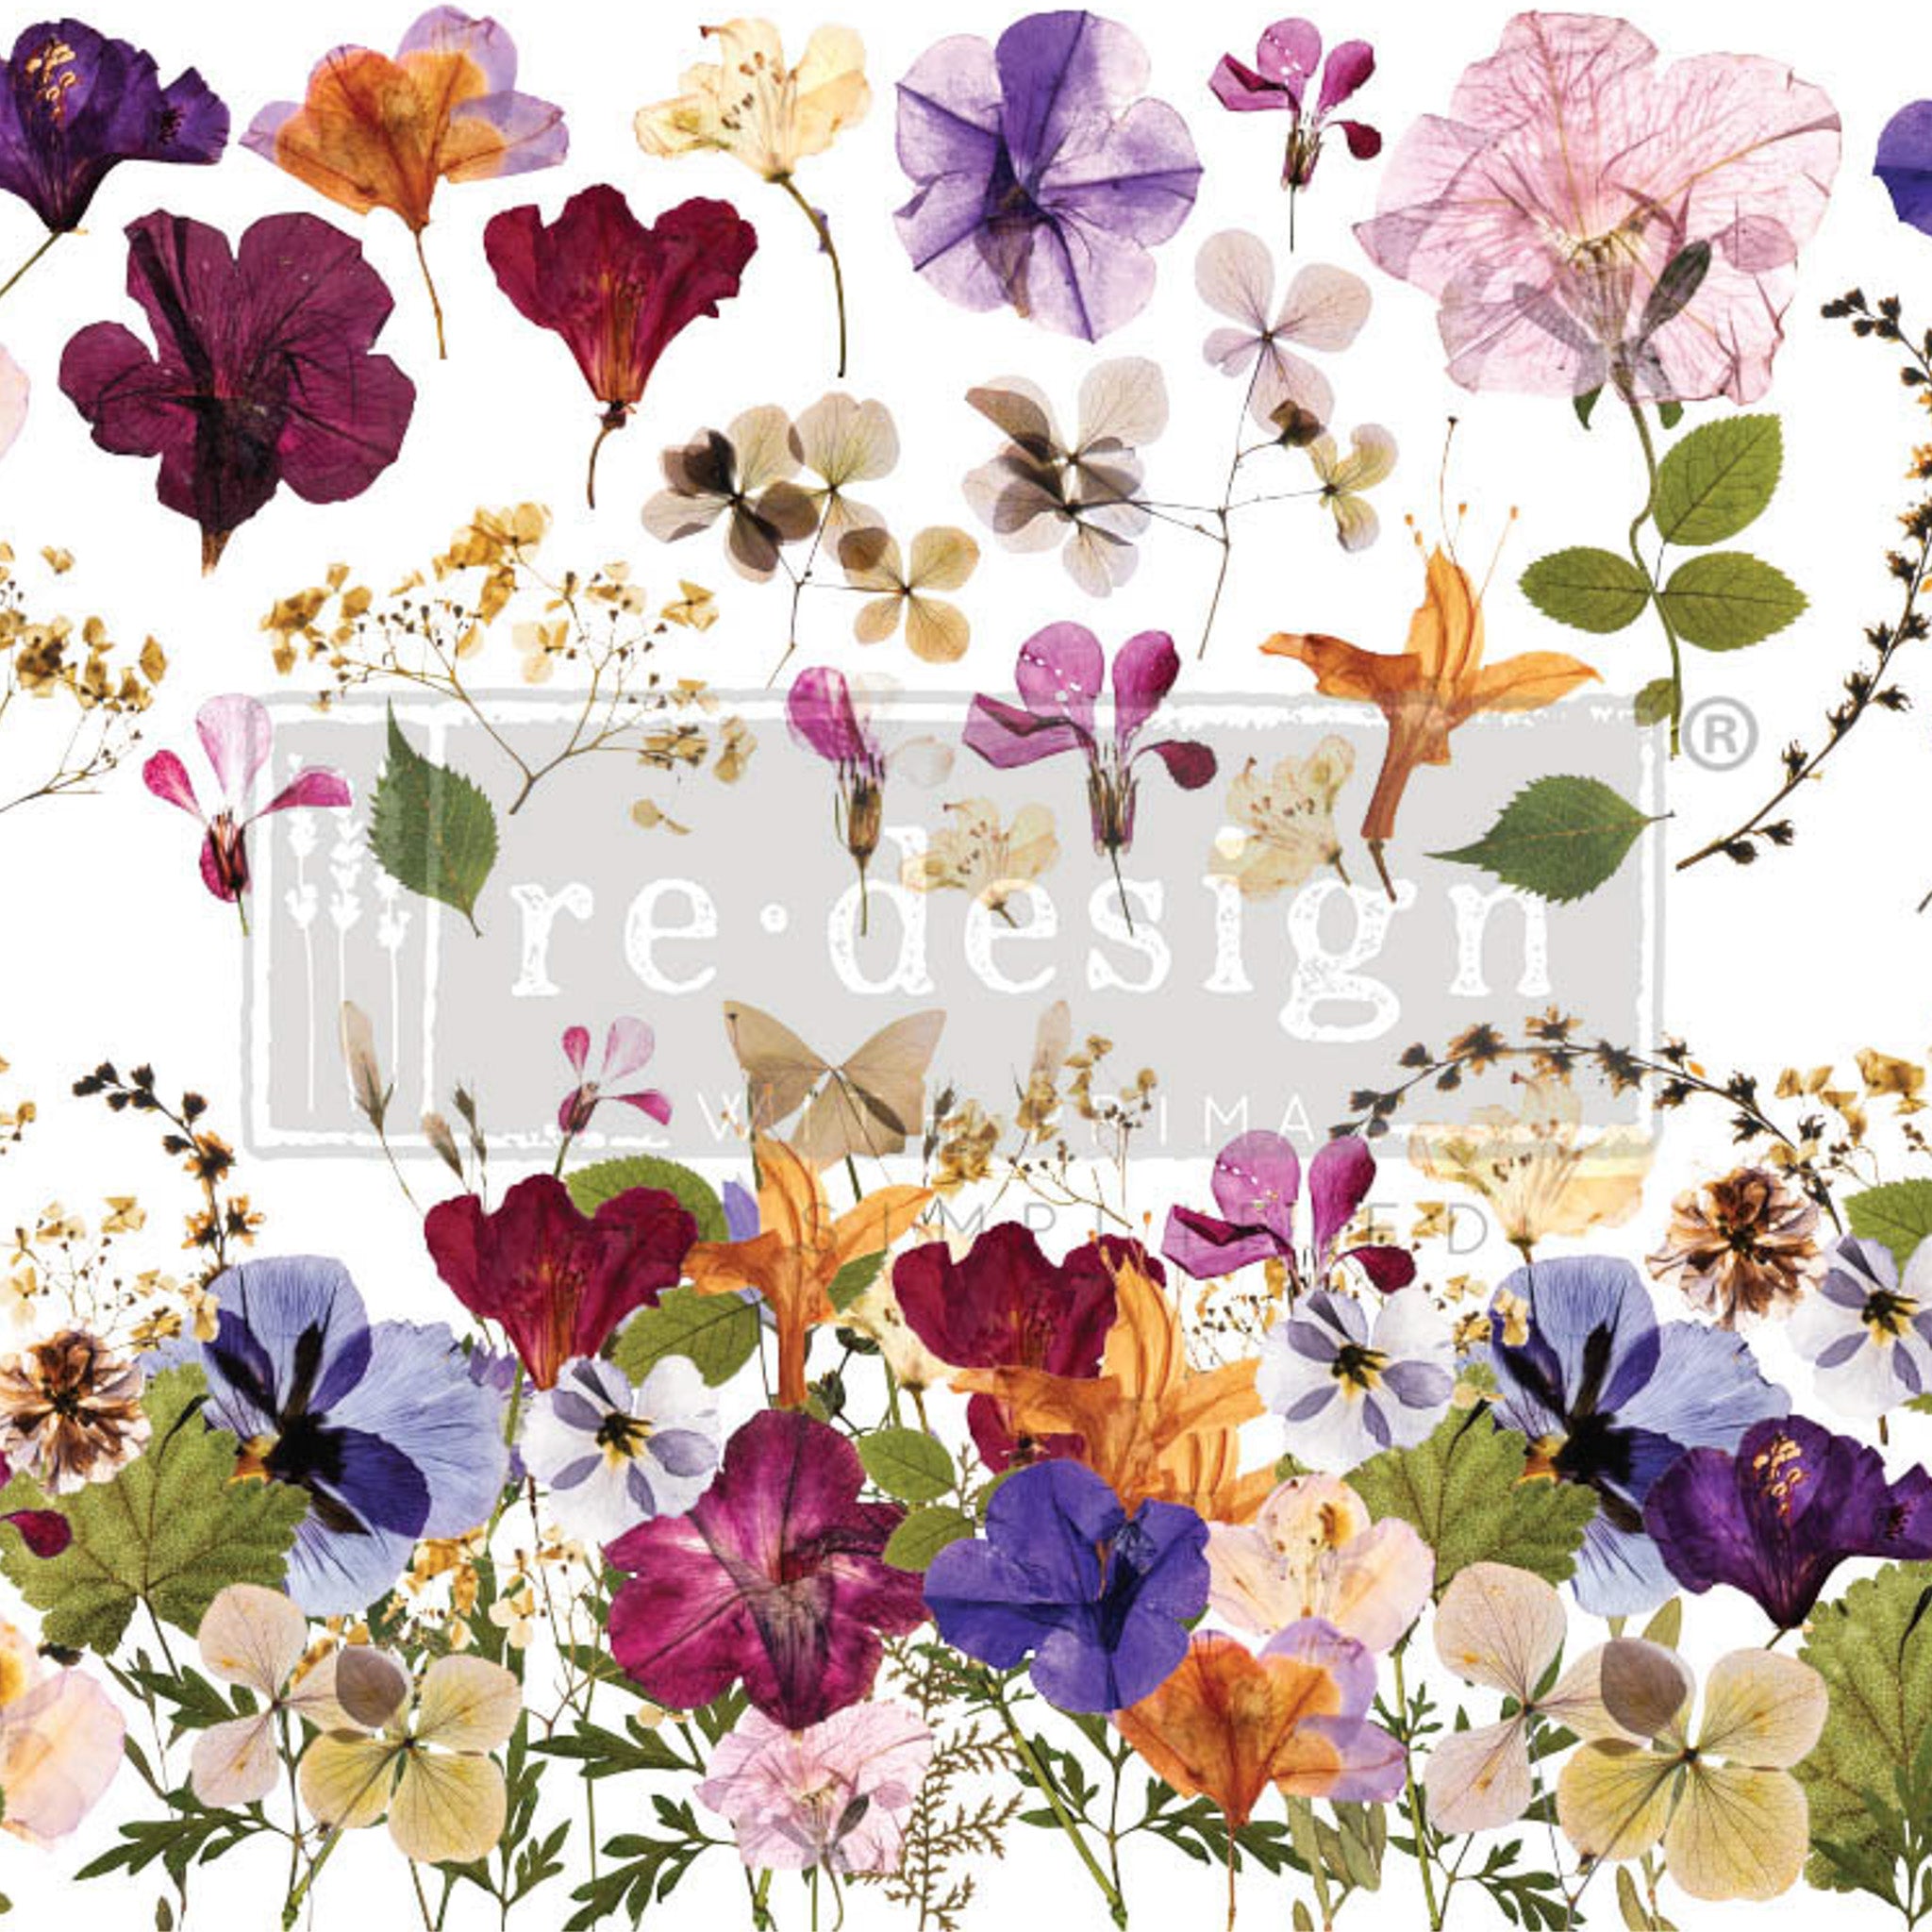 Rub-on transfer design of colorful pressed flowers.